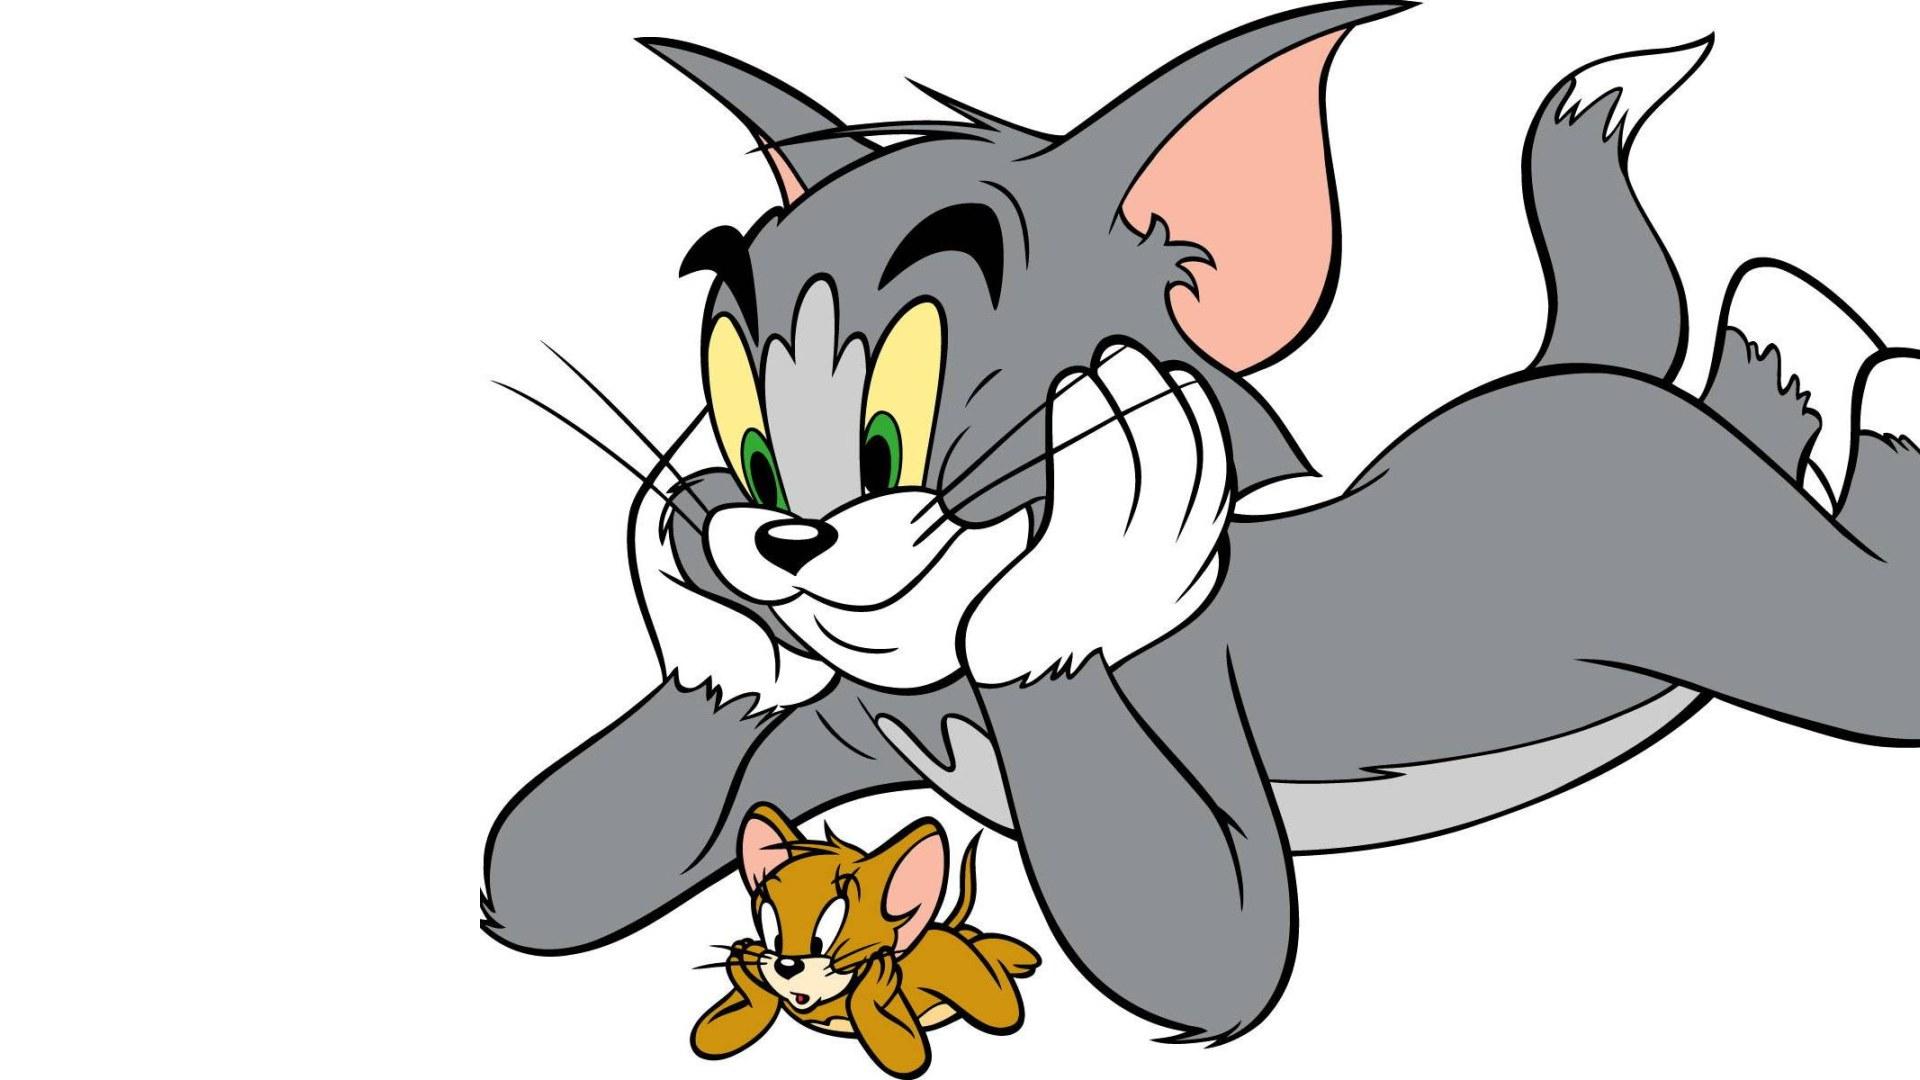 tom and jerry, tv show Full HD